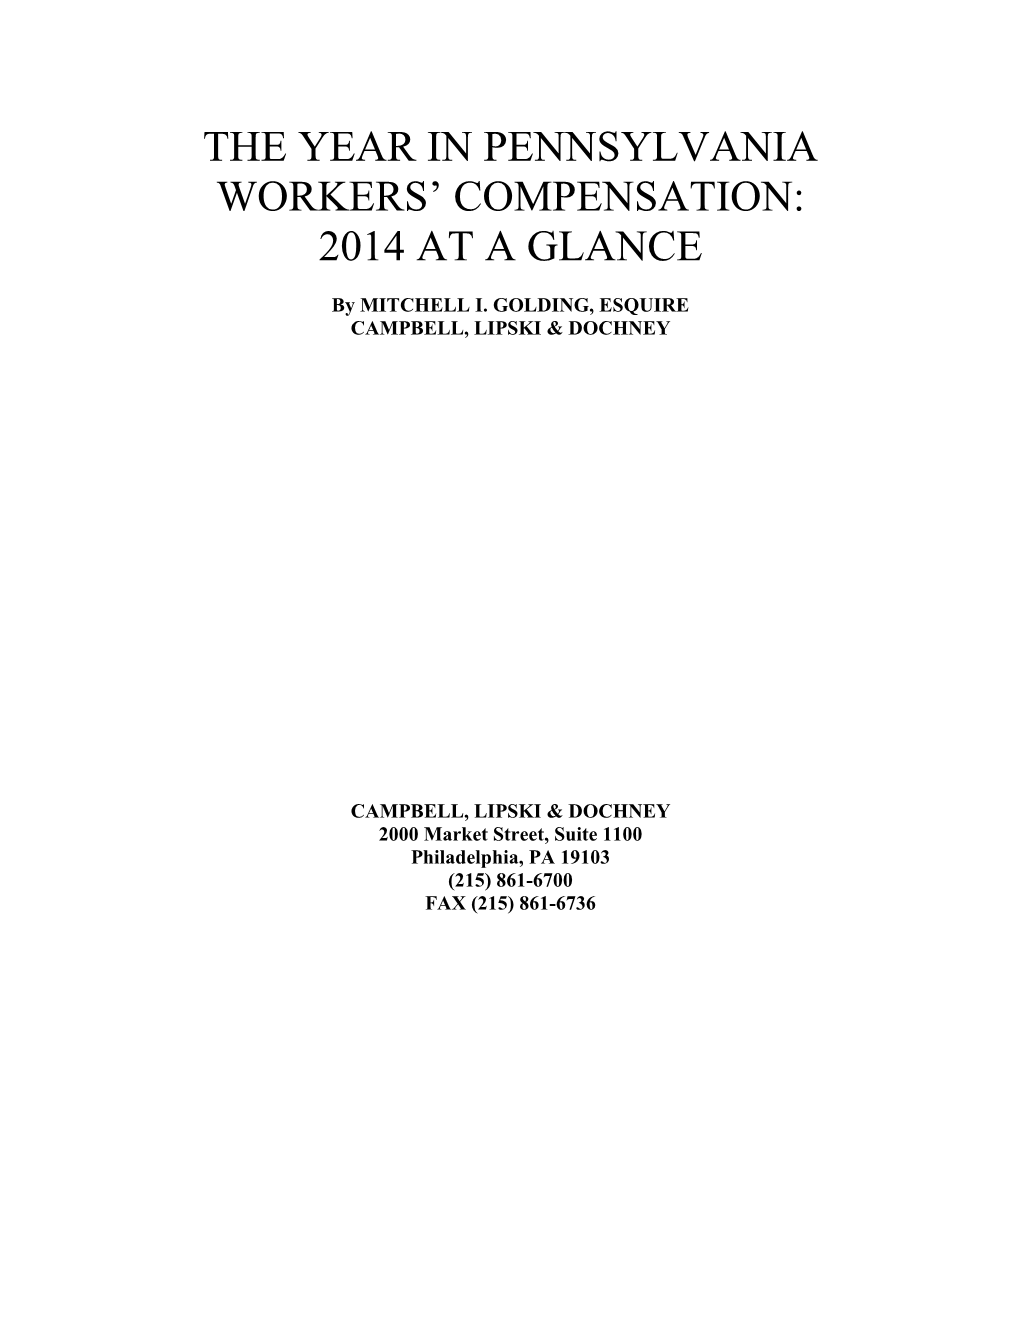 The Year in Pennsylvania Workers' Compensation